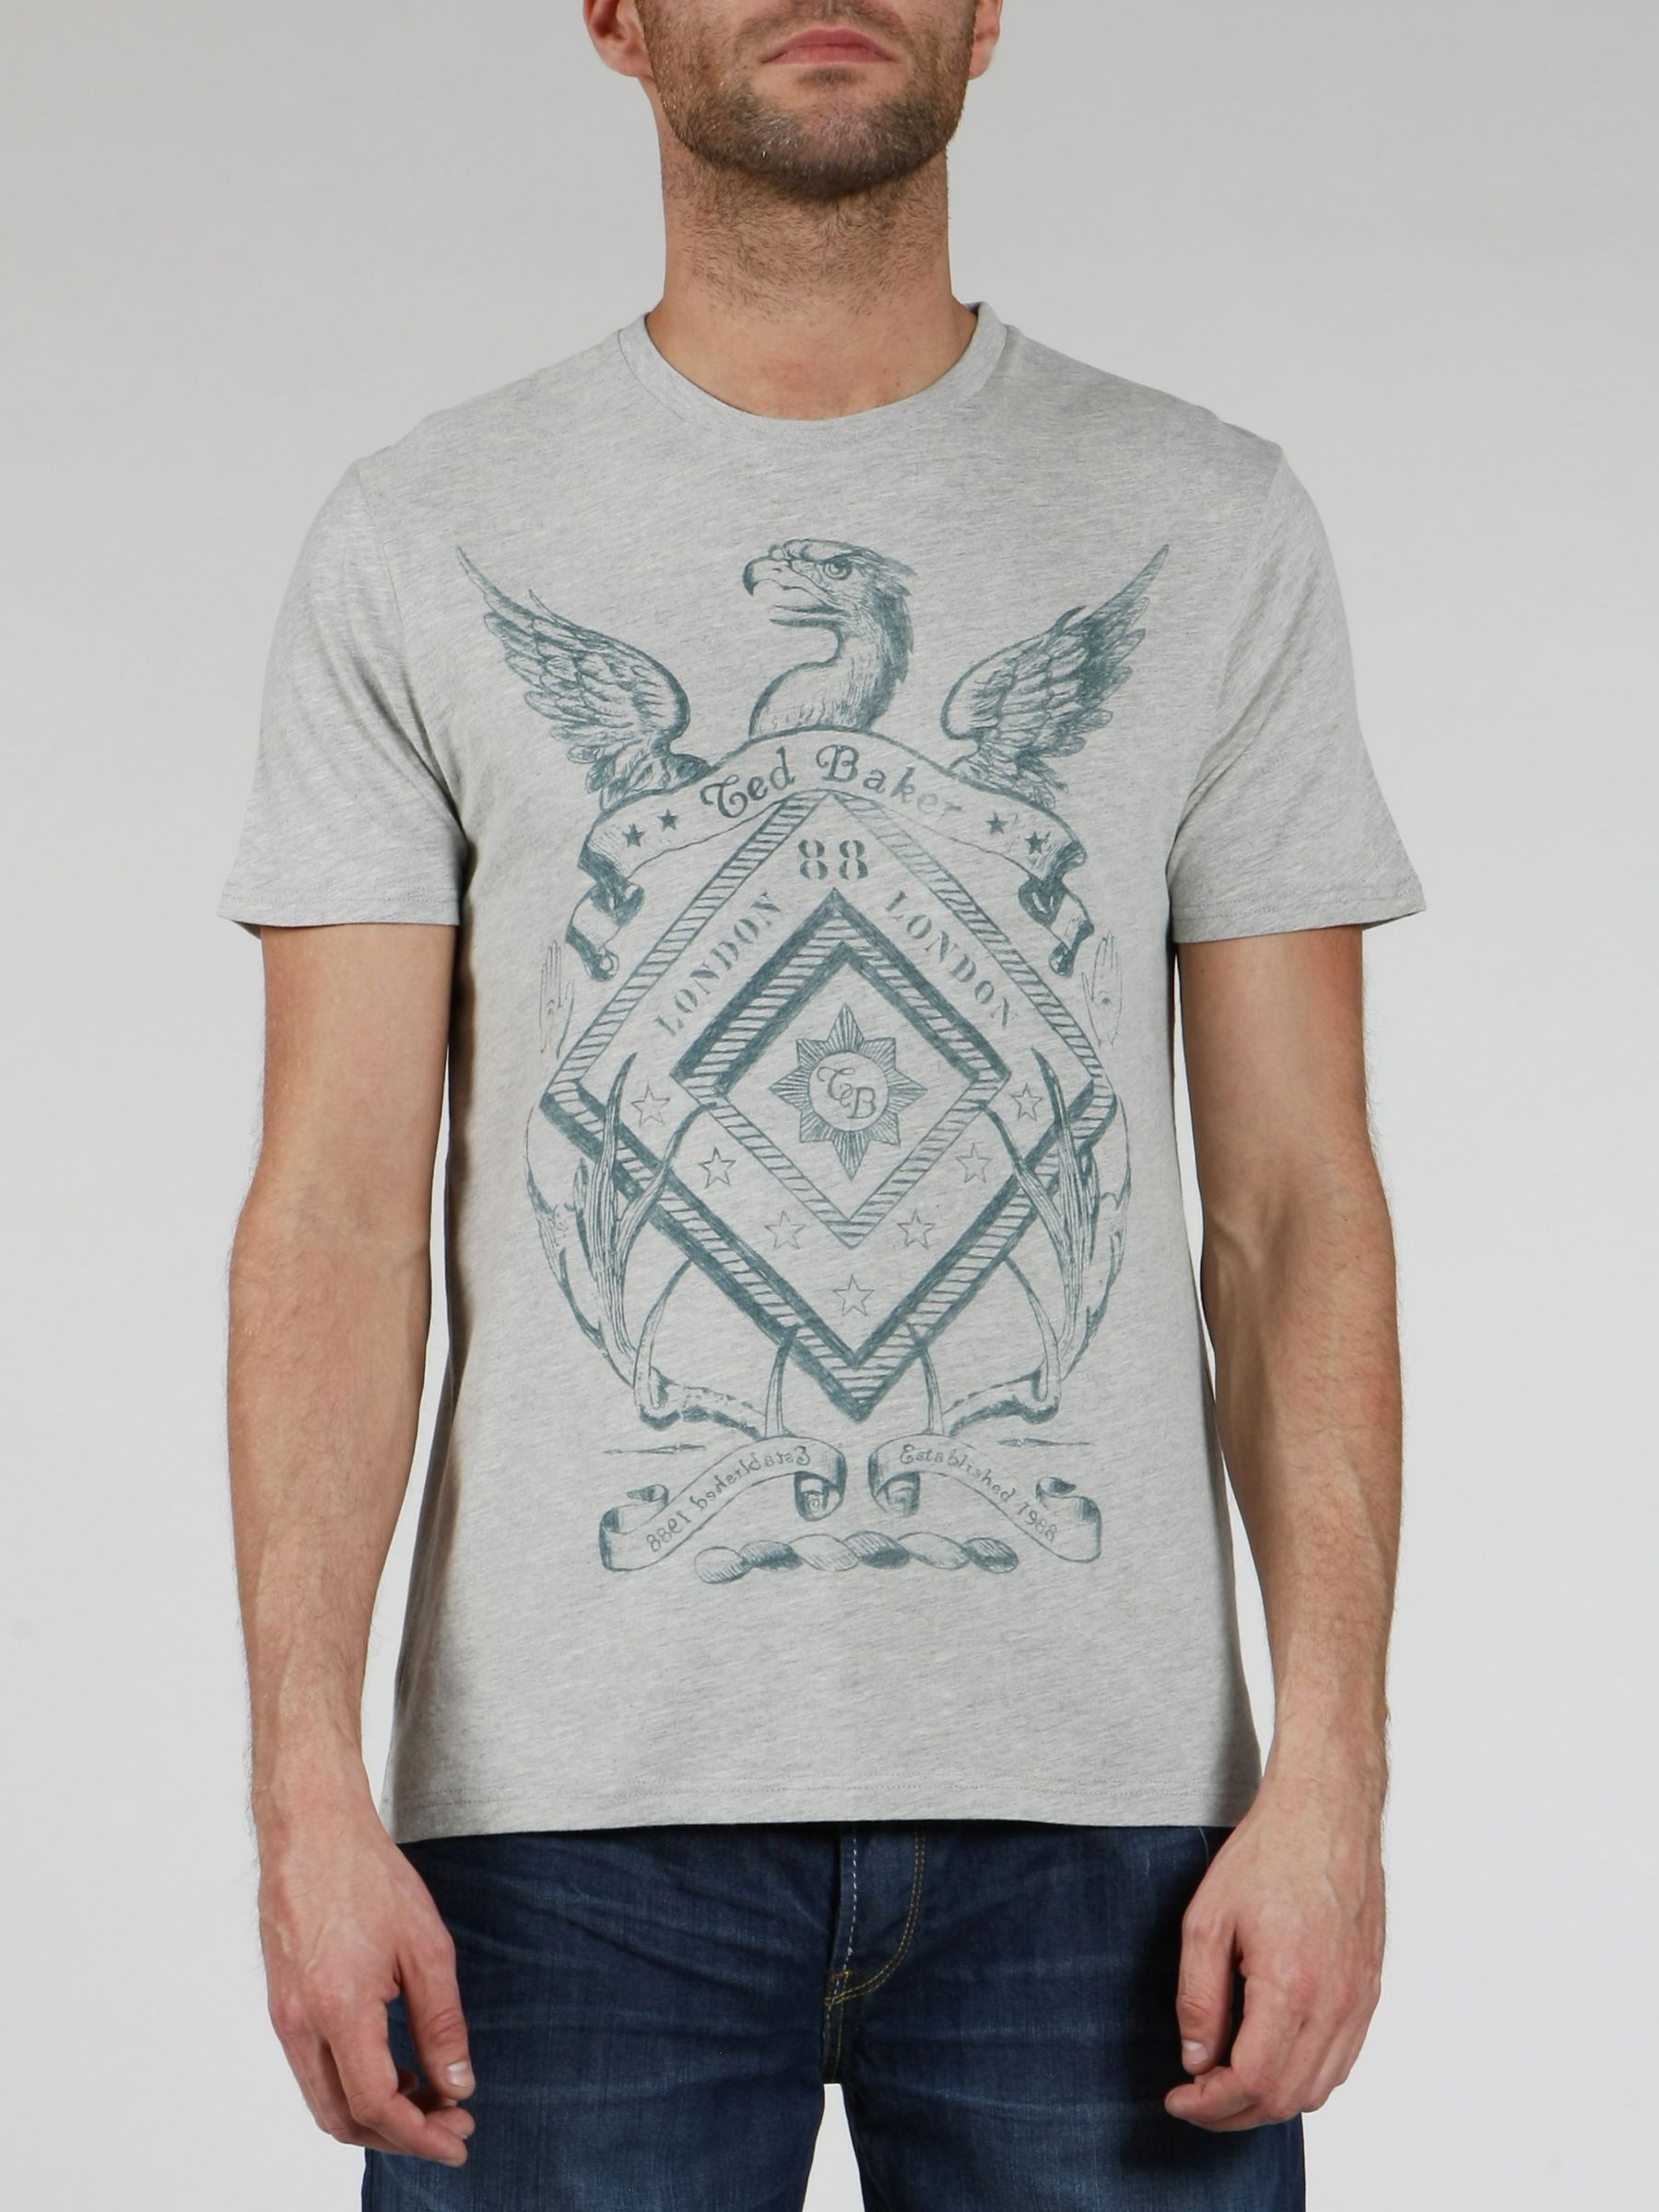 Ted Baker Short-Sleeve Sketched Graphic T-Shirt,